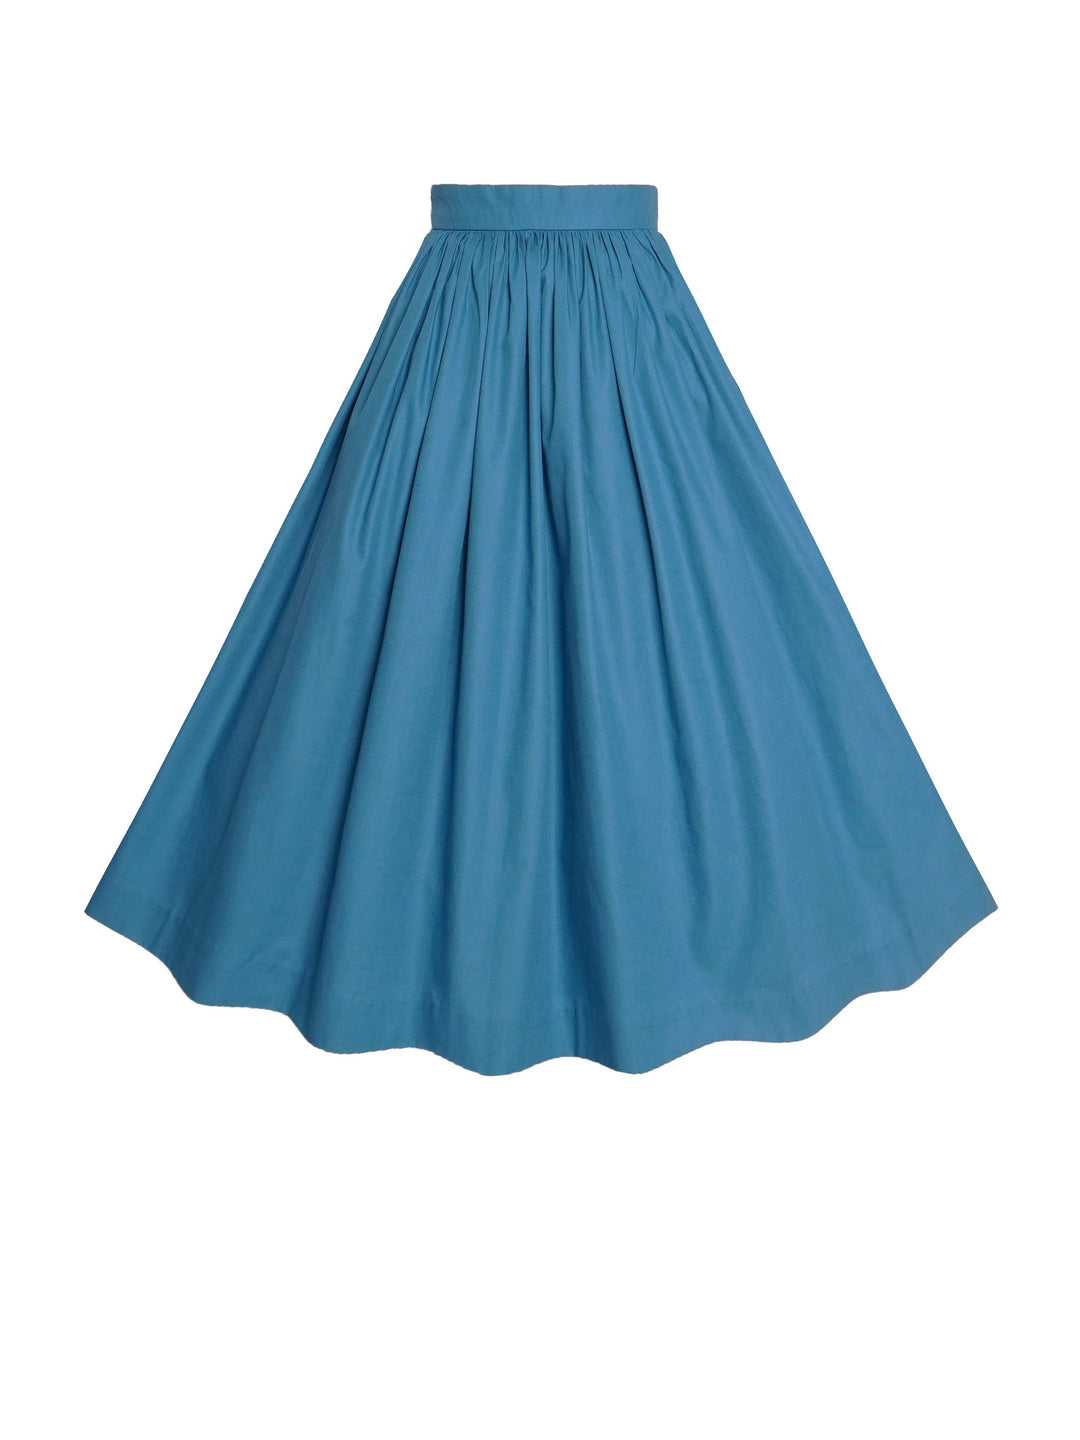 RTS - Size S - Lola Skirt in Air Force Blue Cotton